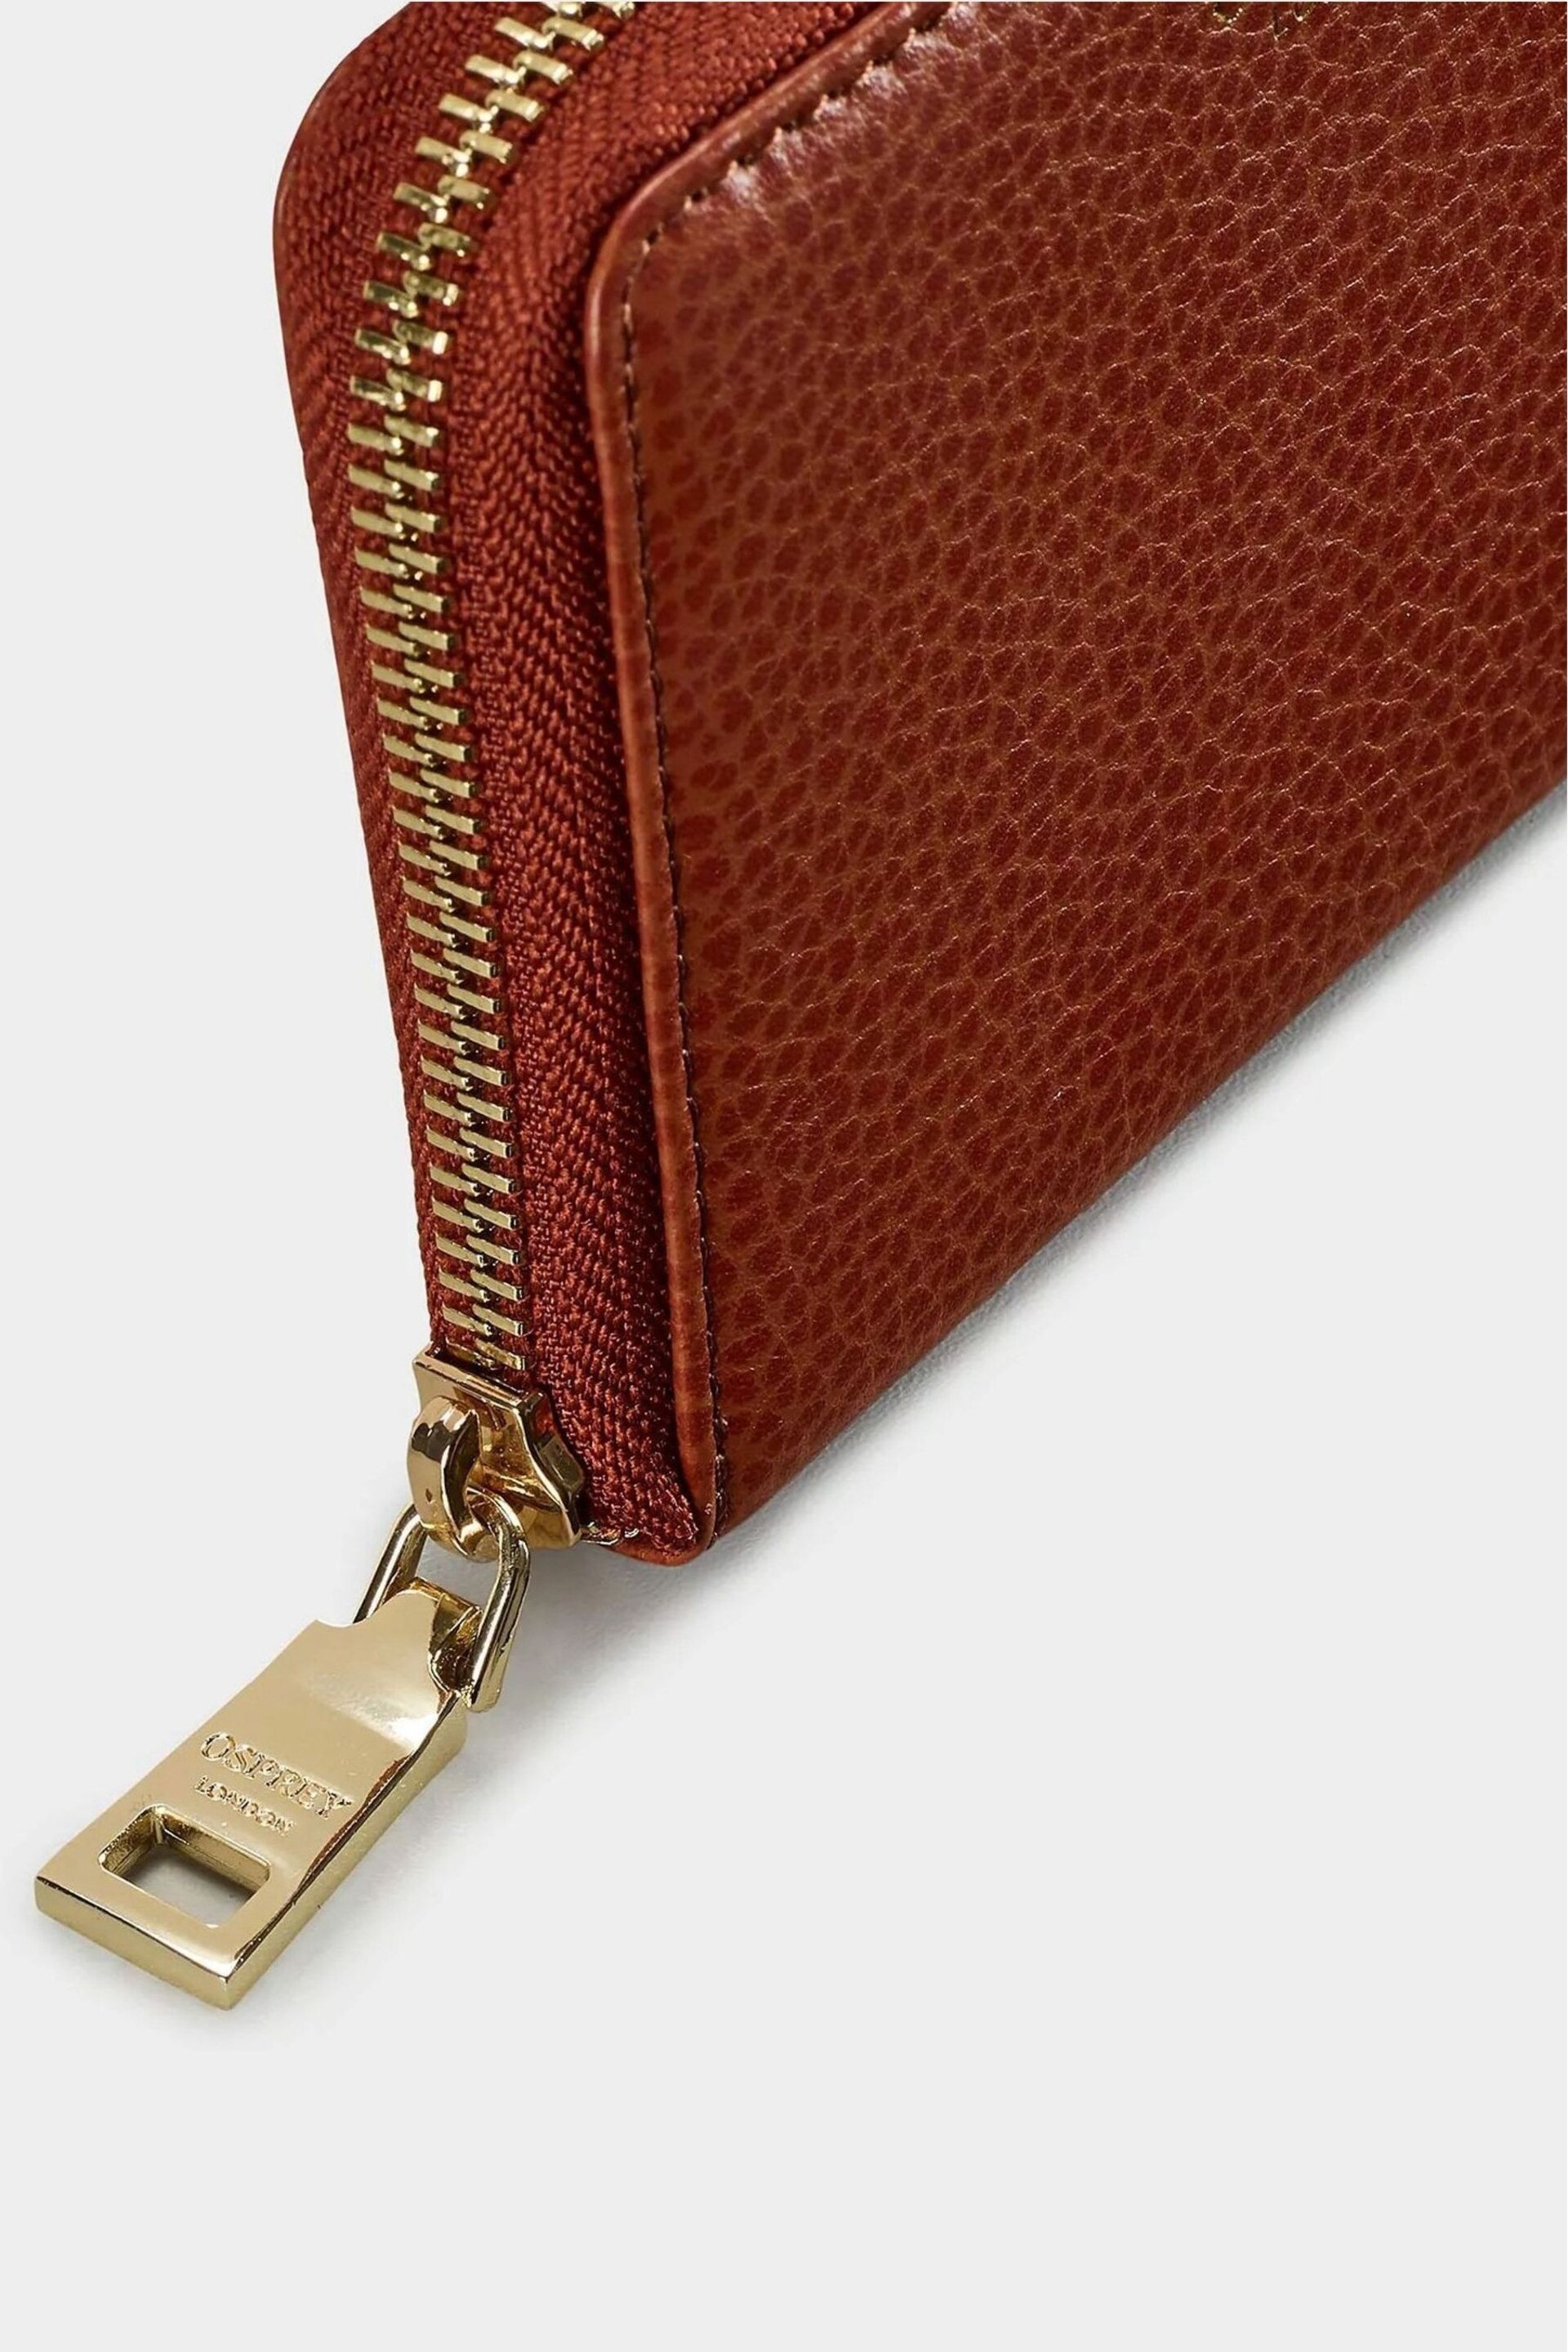 OSPREY LONDON Red The Collier Leather Zip-Round Purse - Image 3 of 4